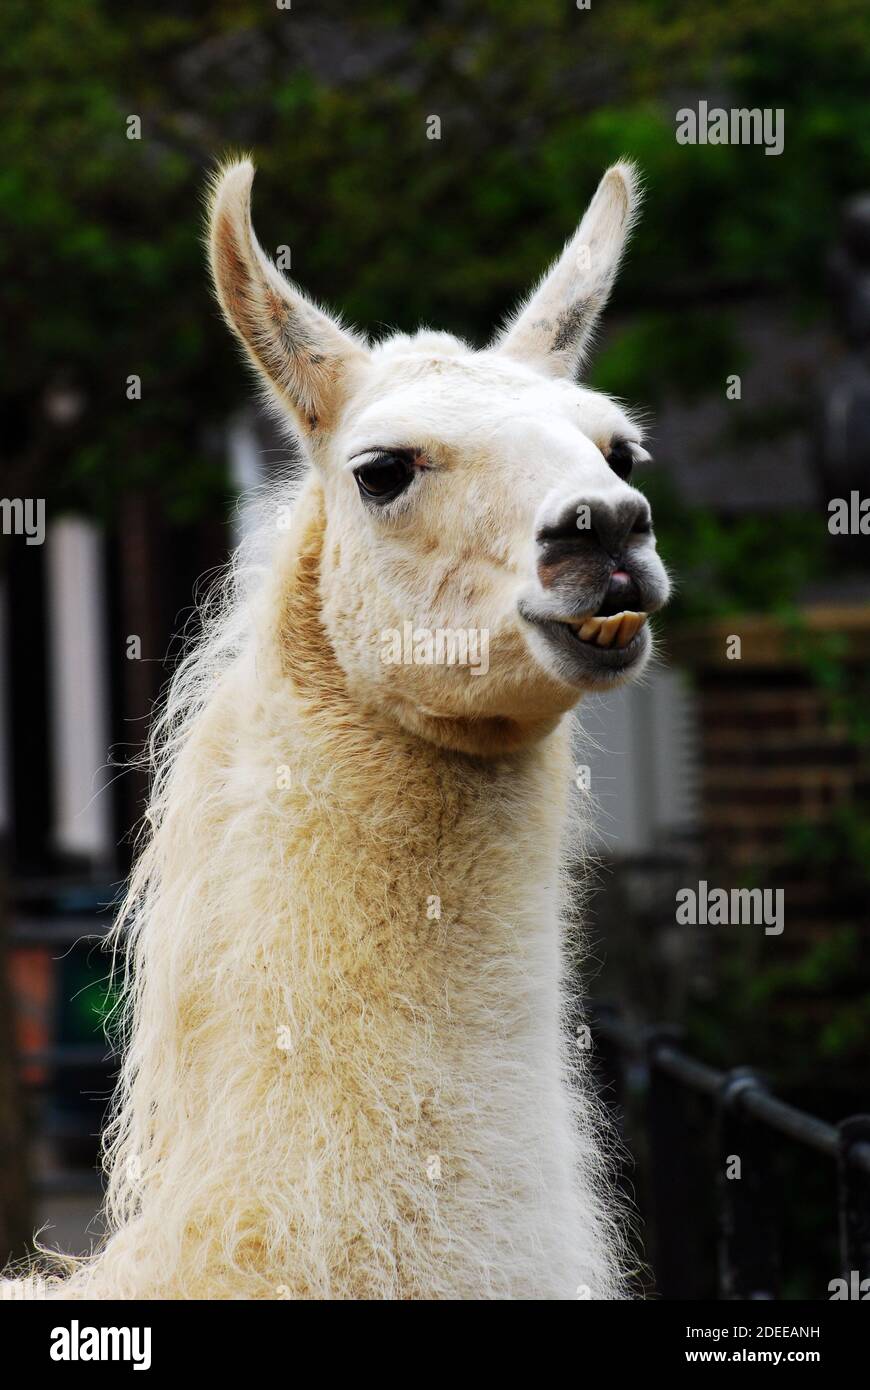 Llama (Lama glama), a hardy domesticated South American camelid, widely bred for its wool & meat Traditionally used as a pack animal in Andean culture Stock Photo